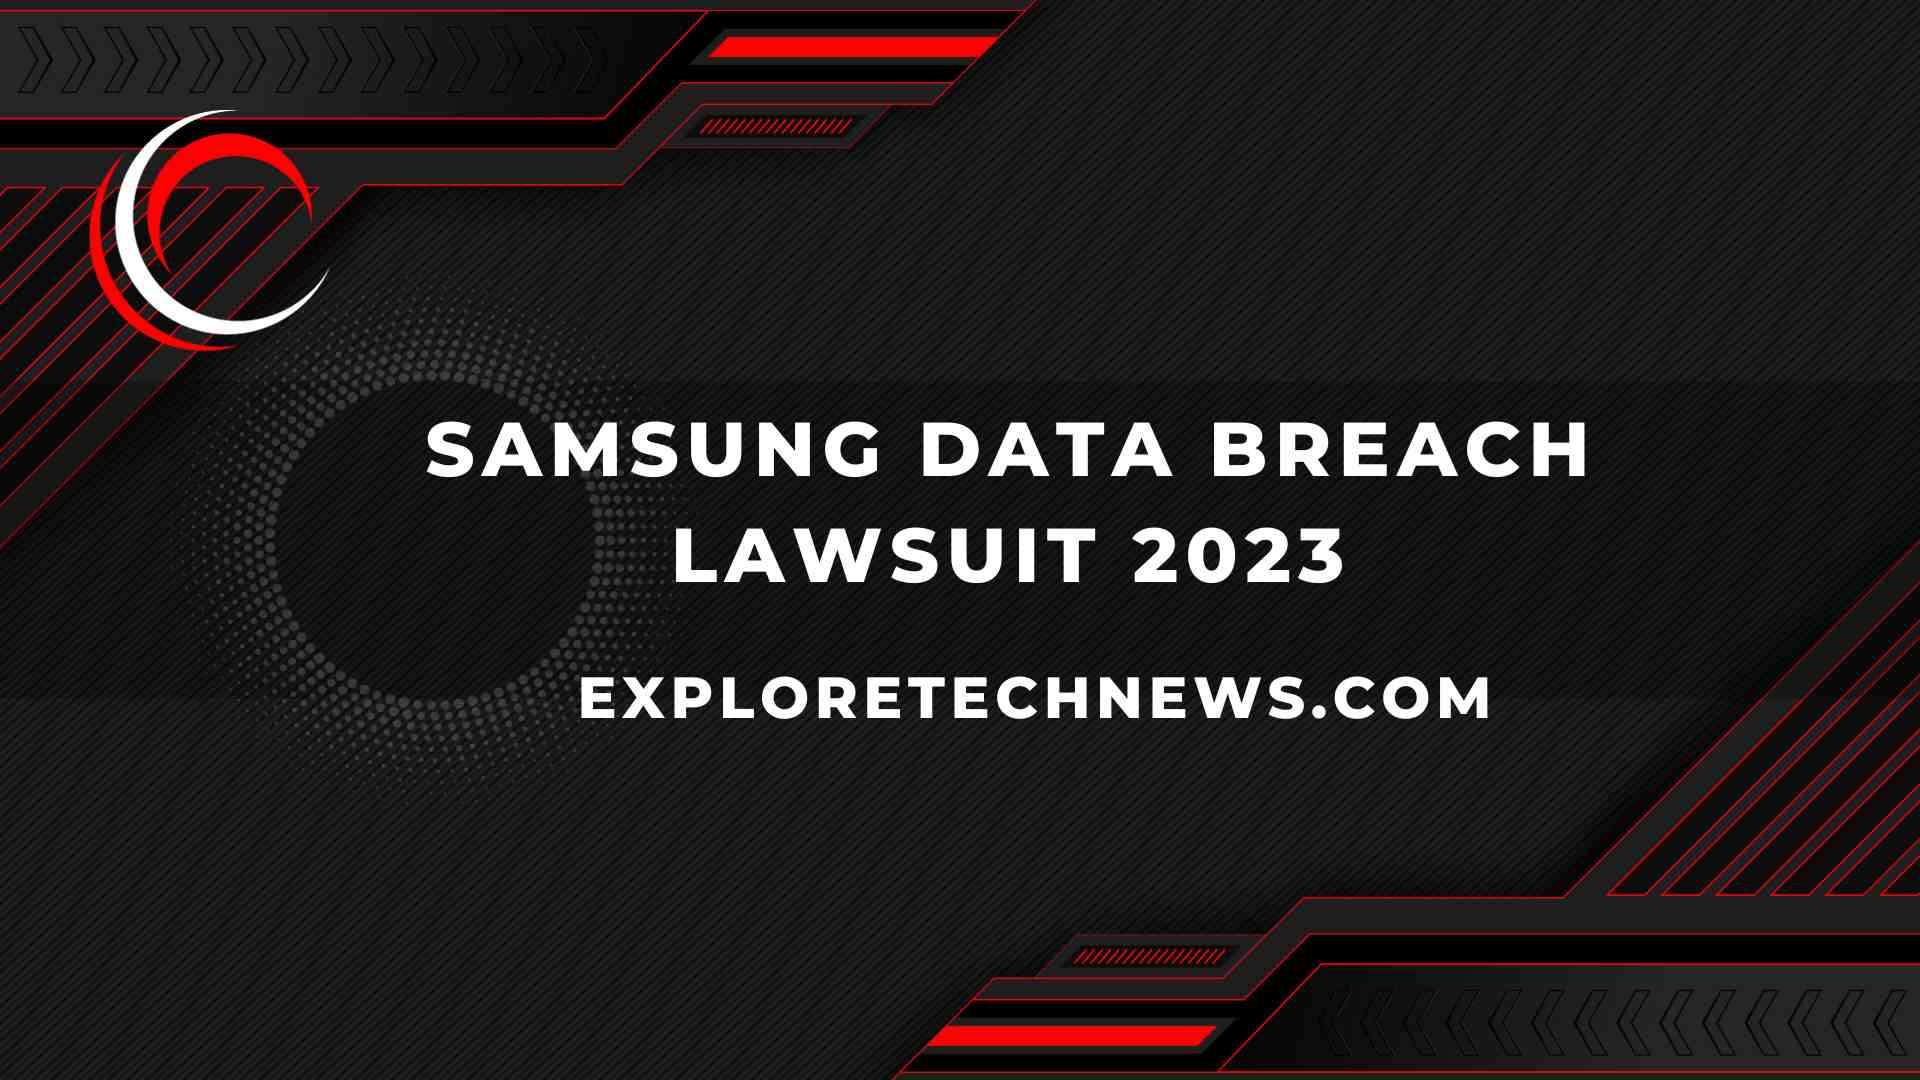 Samsung Data Breach Lawsuit 2023: Important Updates and News